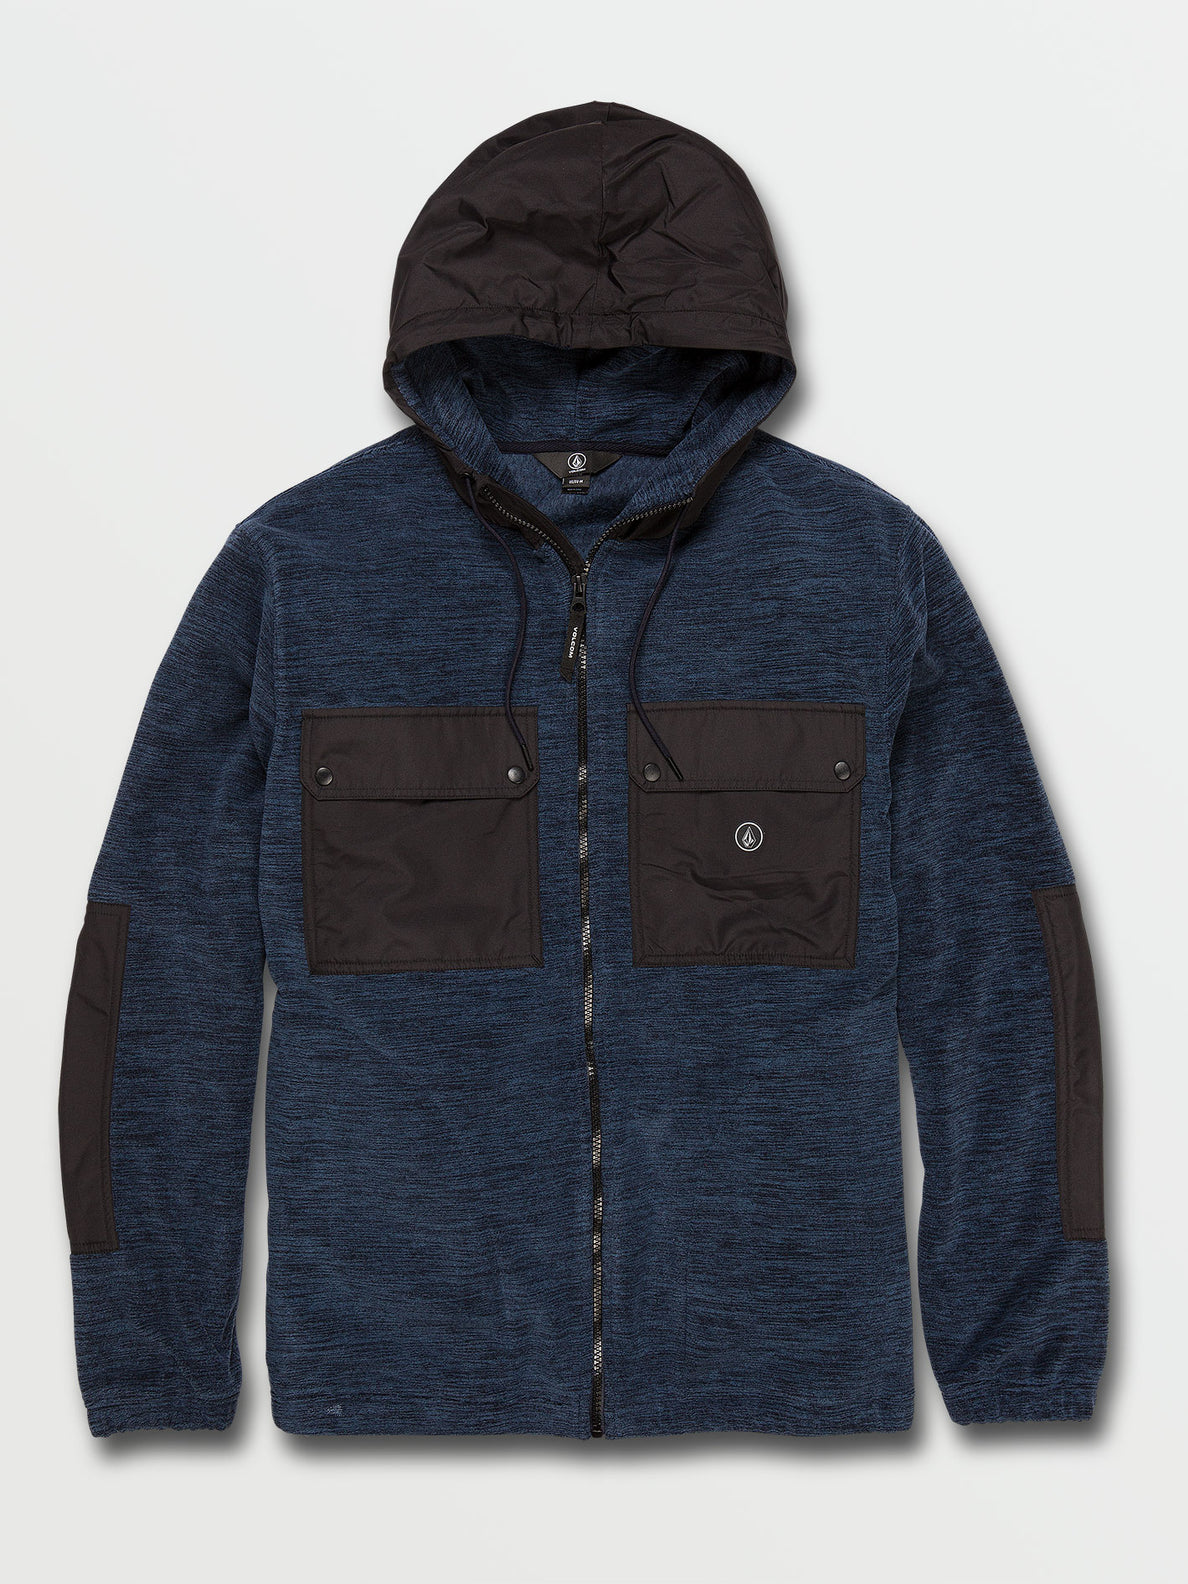 Yzzolater Lined Zip Hoodie - Navy (A5832100_NVY) [F]